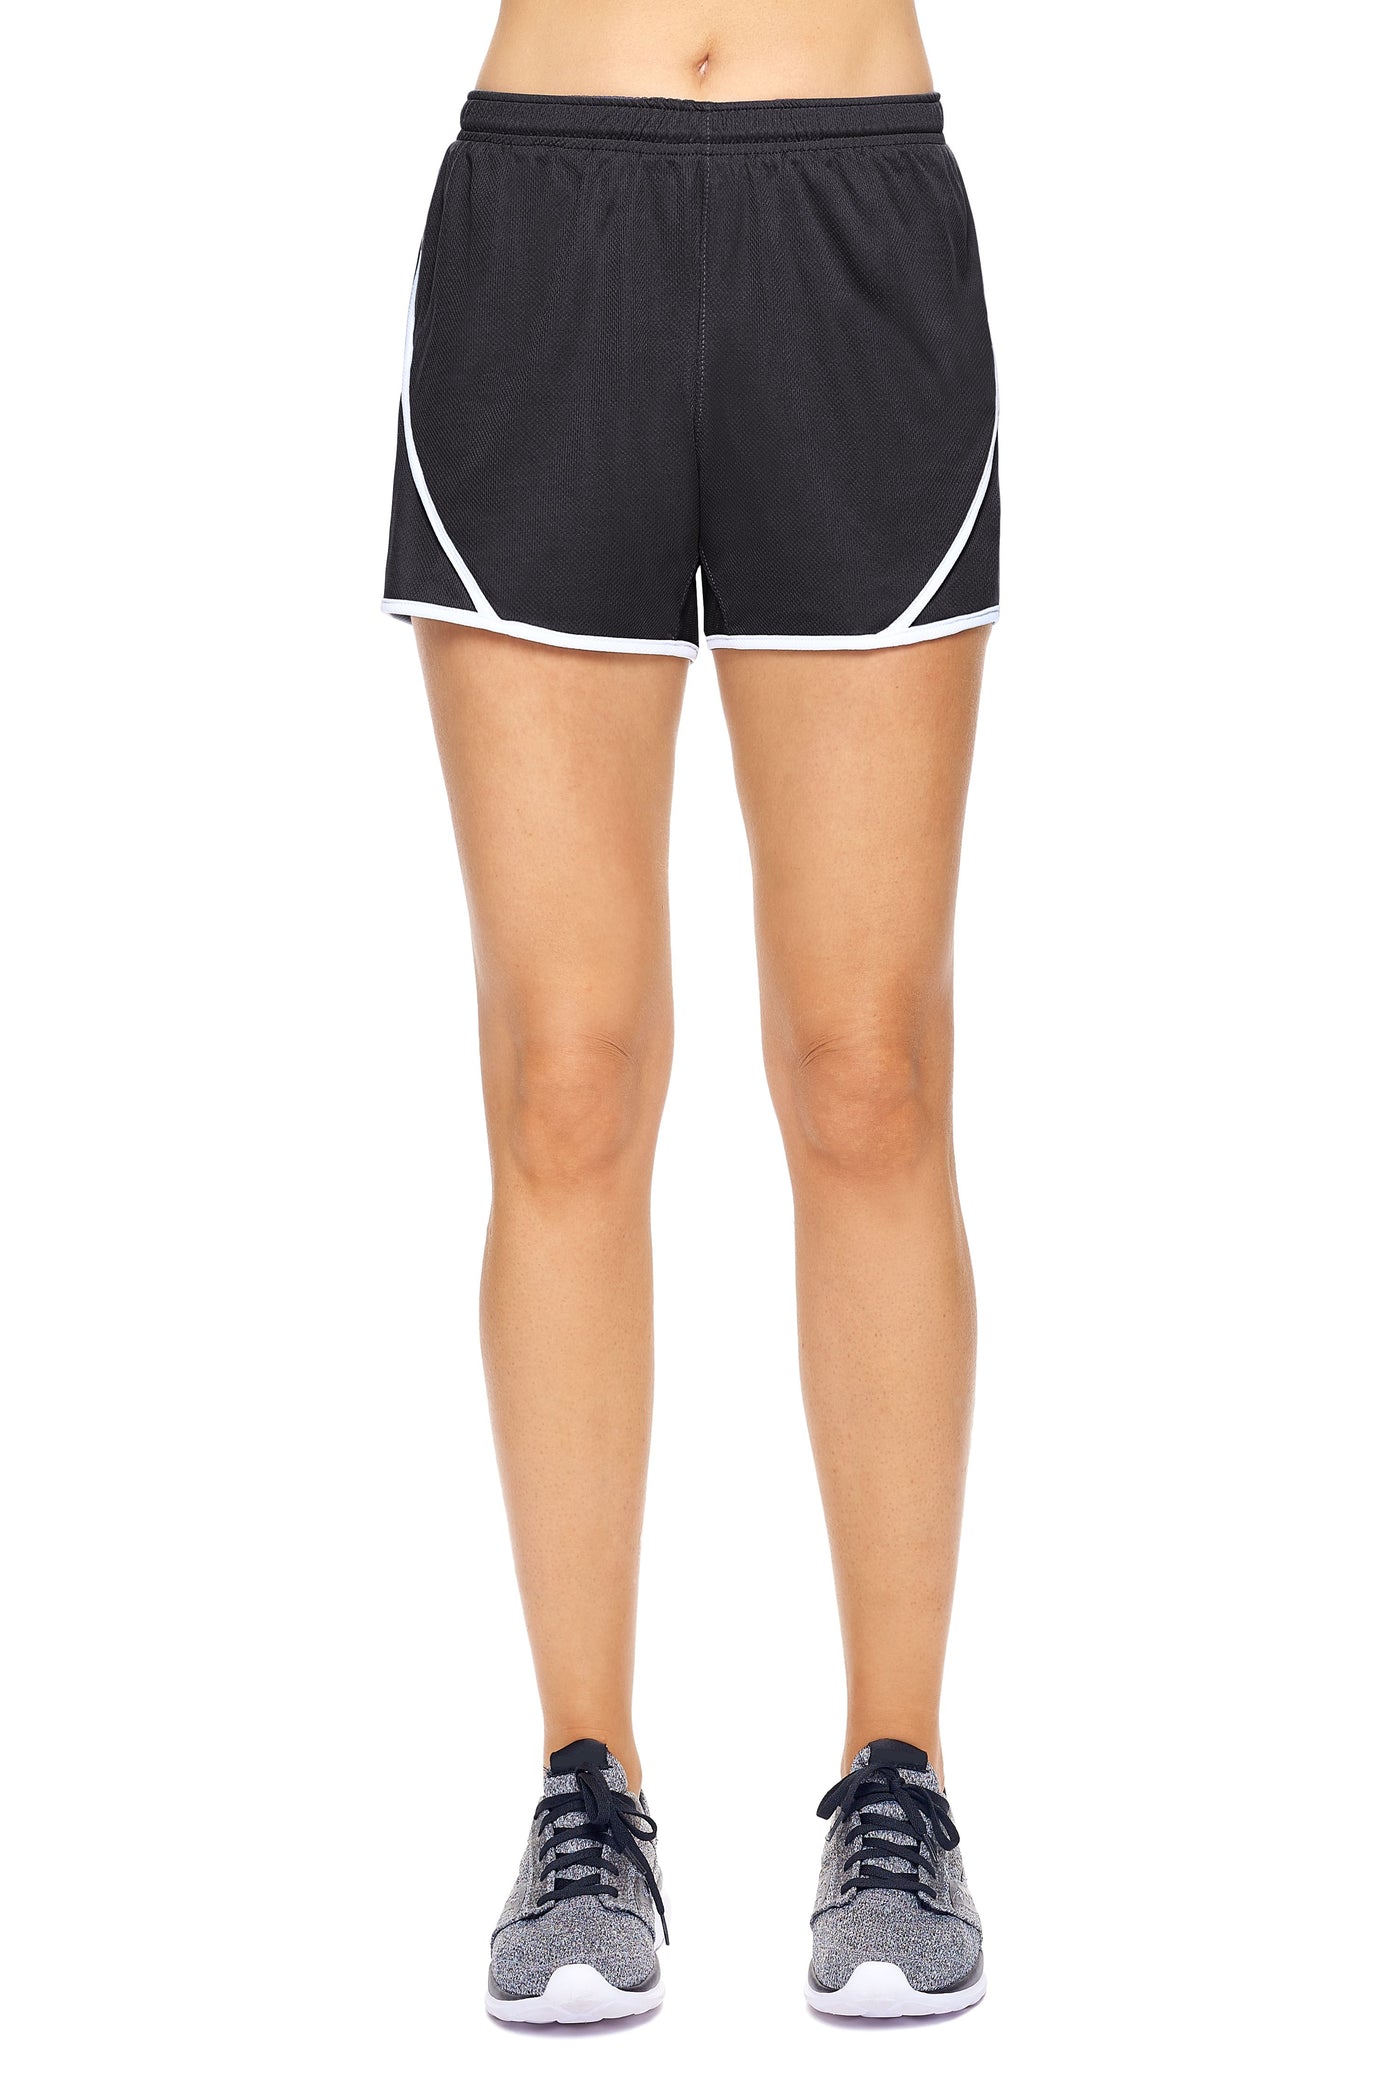 Oxymesh™ Energy Shorts 🇺🇸 - Expert Brand Apparel#color_black